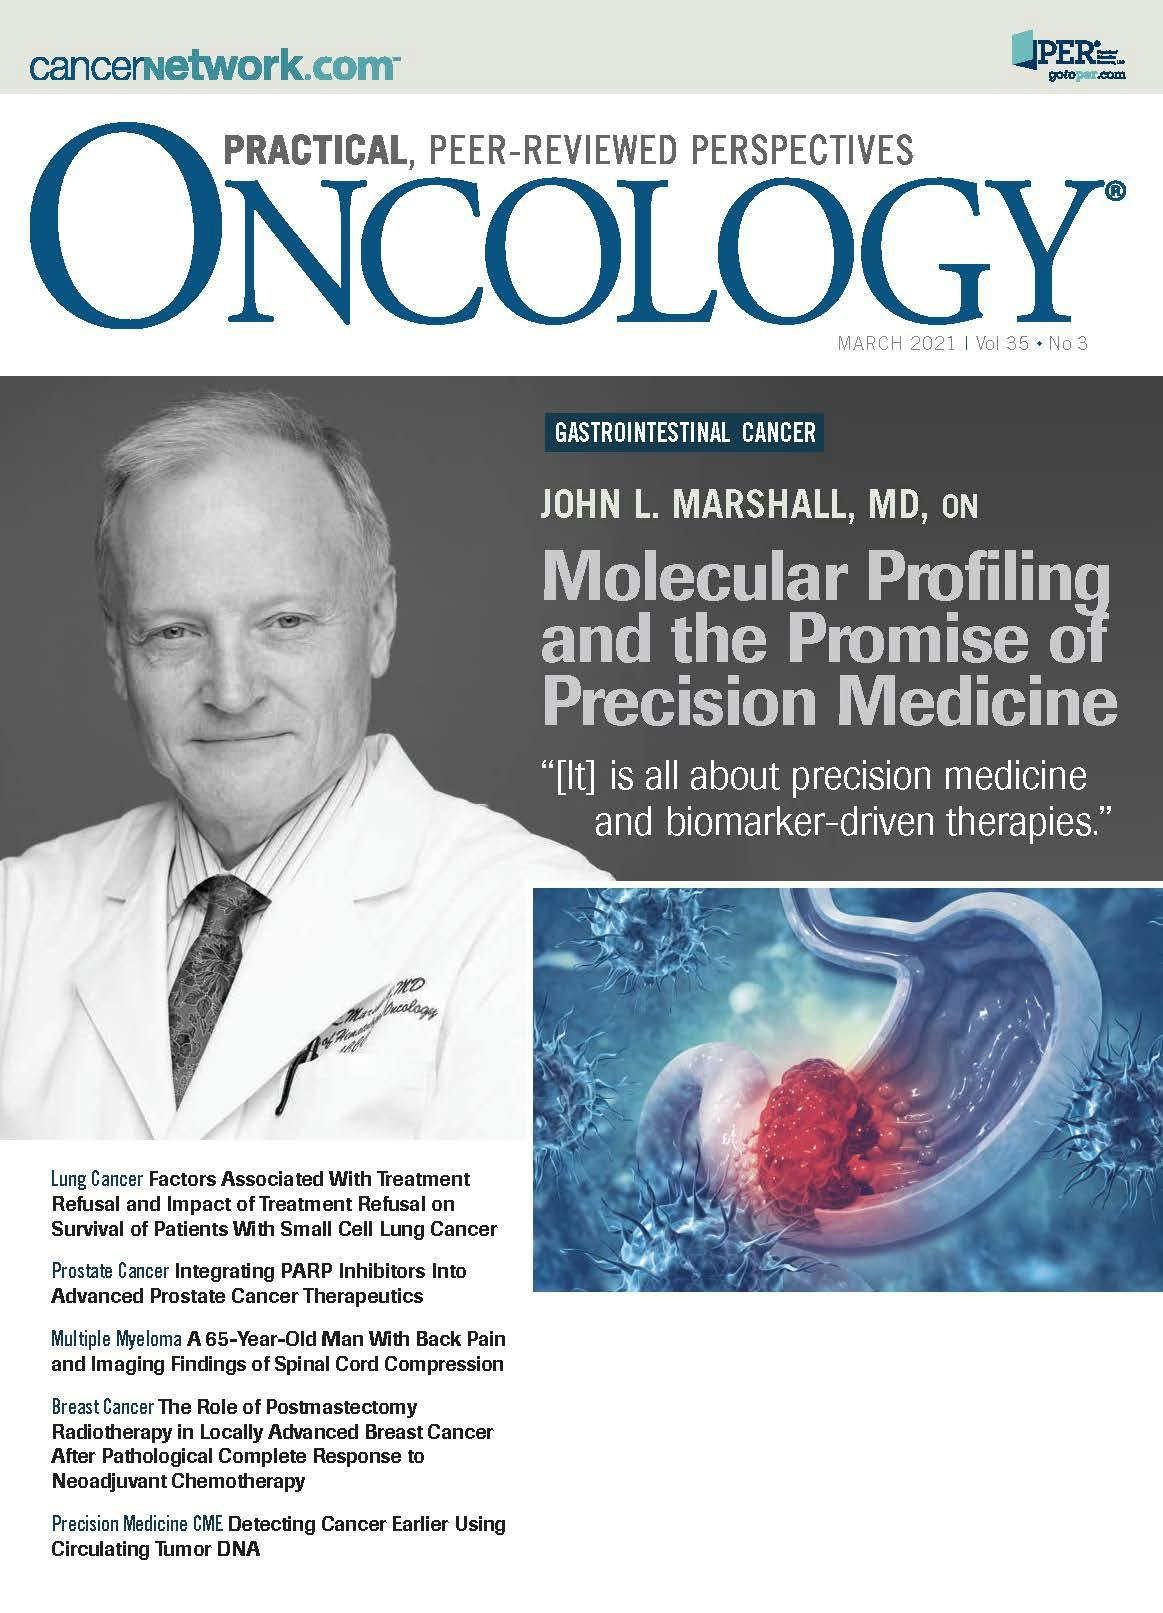 ONCOLOGY Vol 35 Issue 3